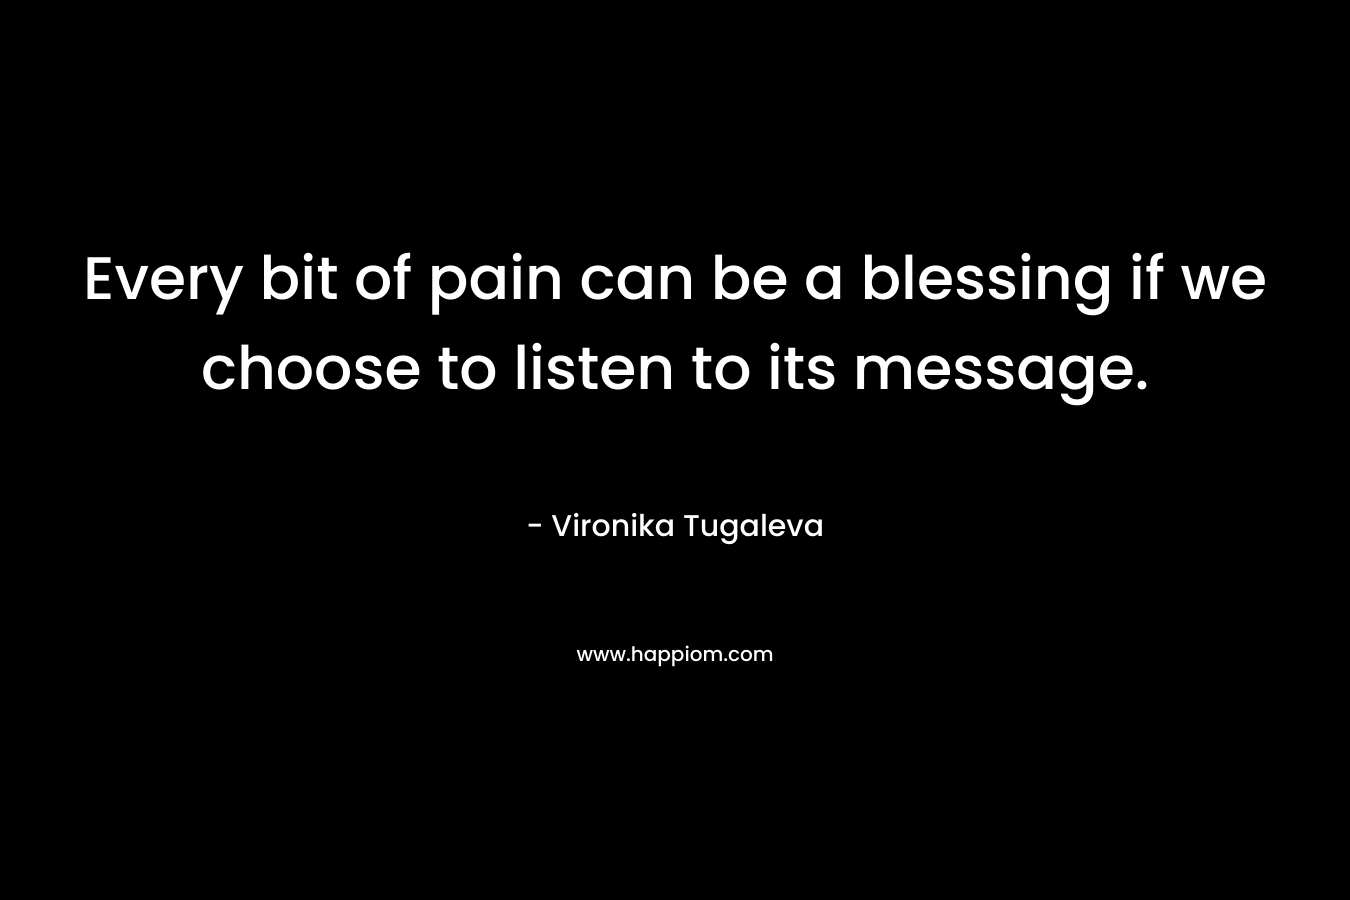 Every bit of pain can be a blessing if we choose to listen to its message.